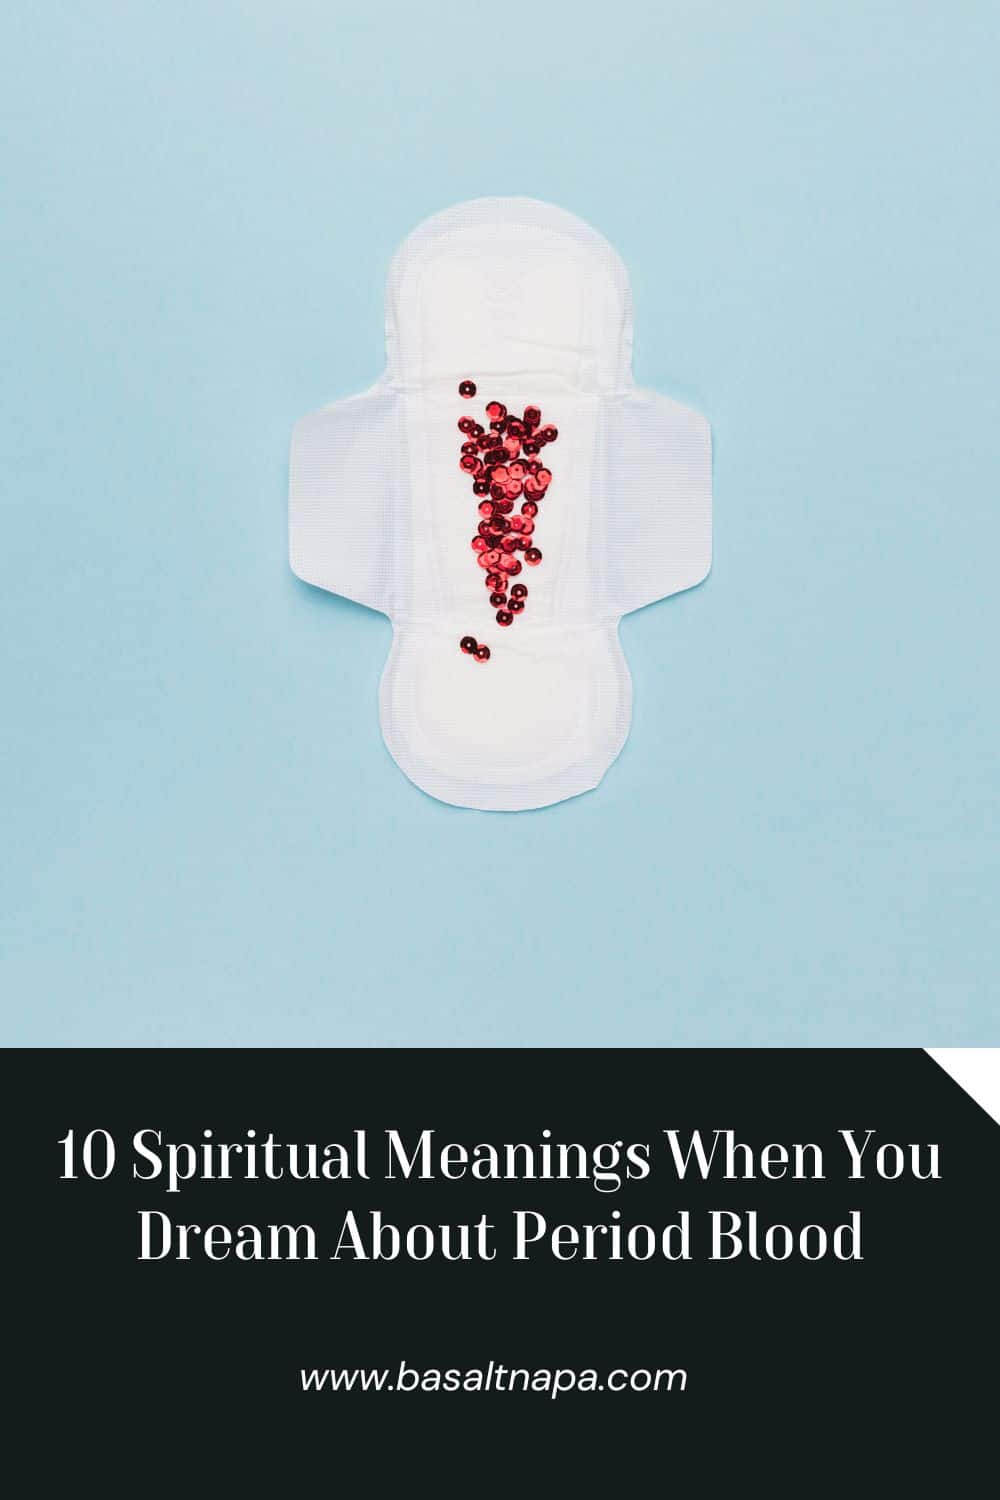 10 Spiritual Meanings When You Dream About Period Blood